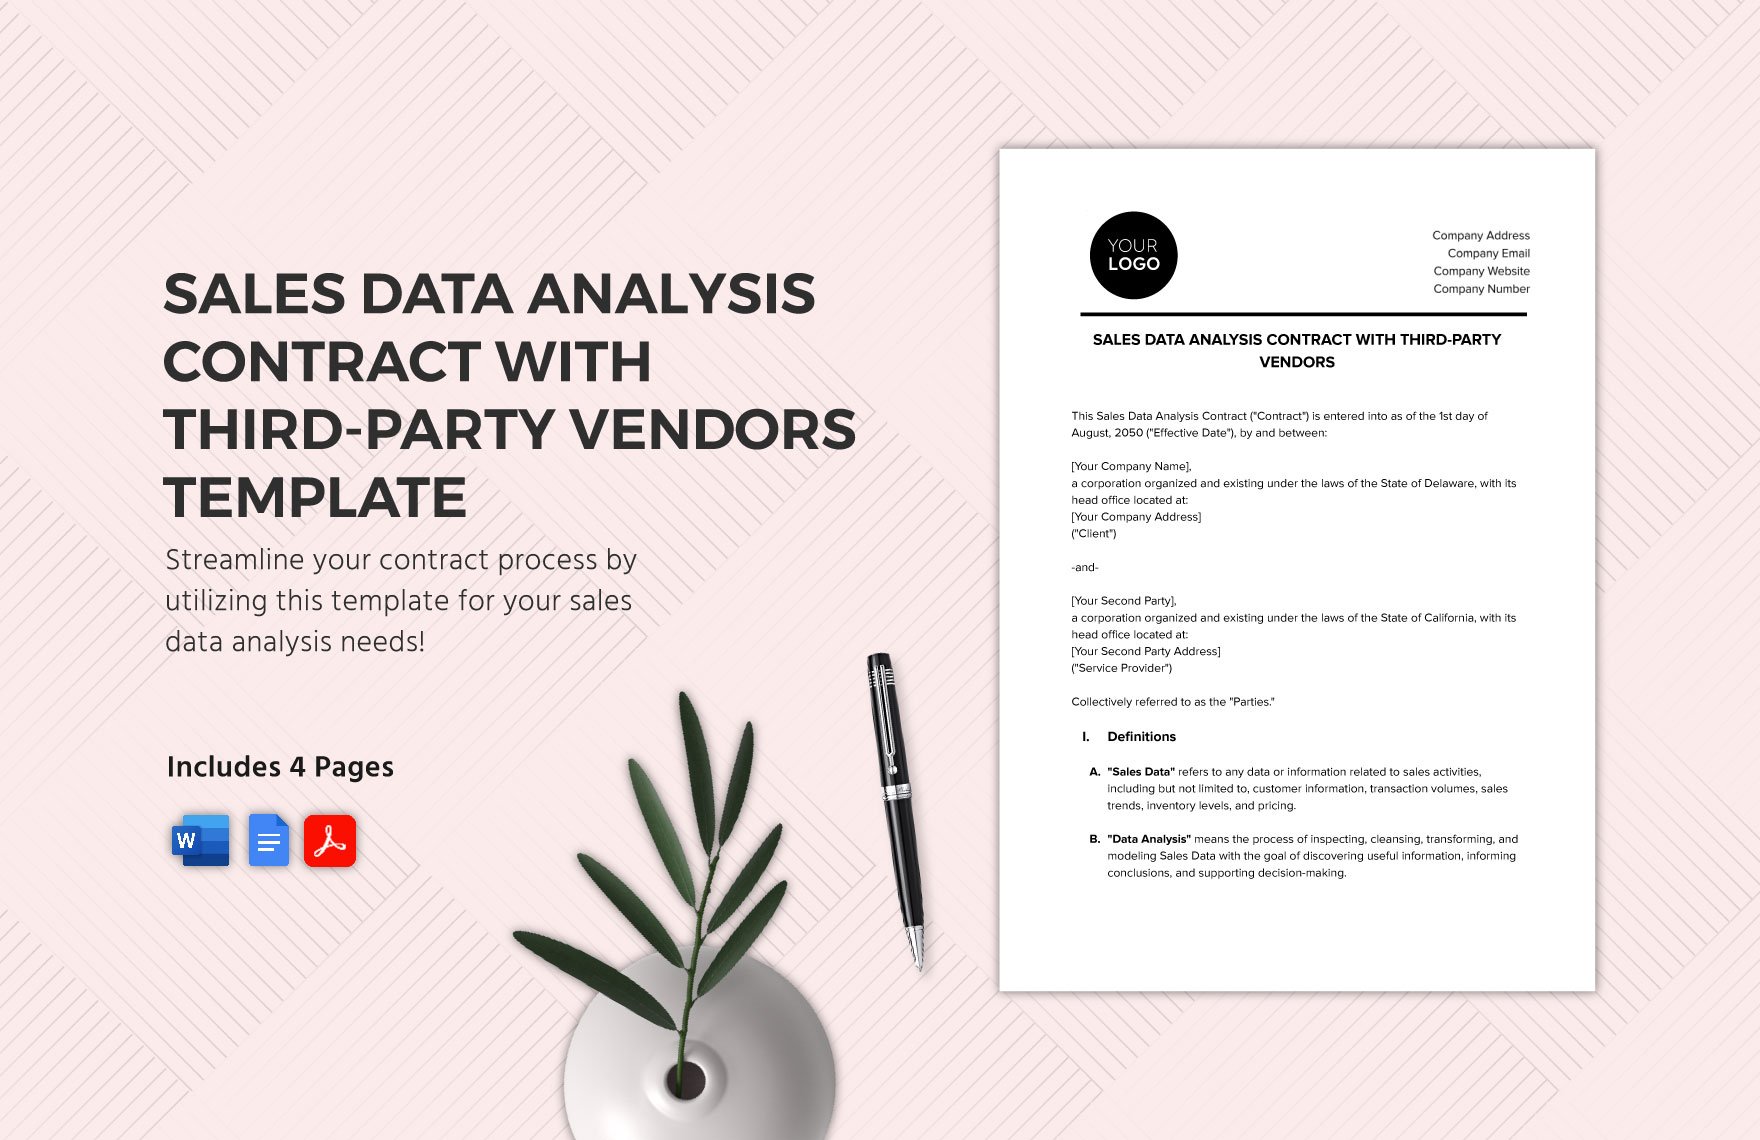 Sales Data Analysis Contract with Third-party Vendors Template